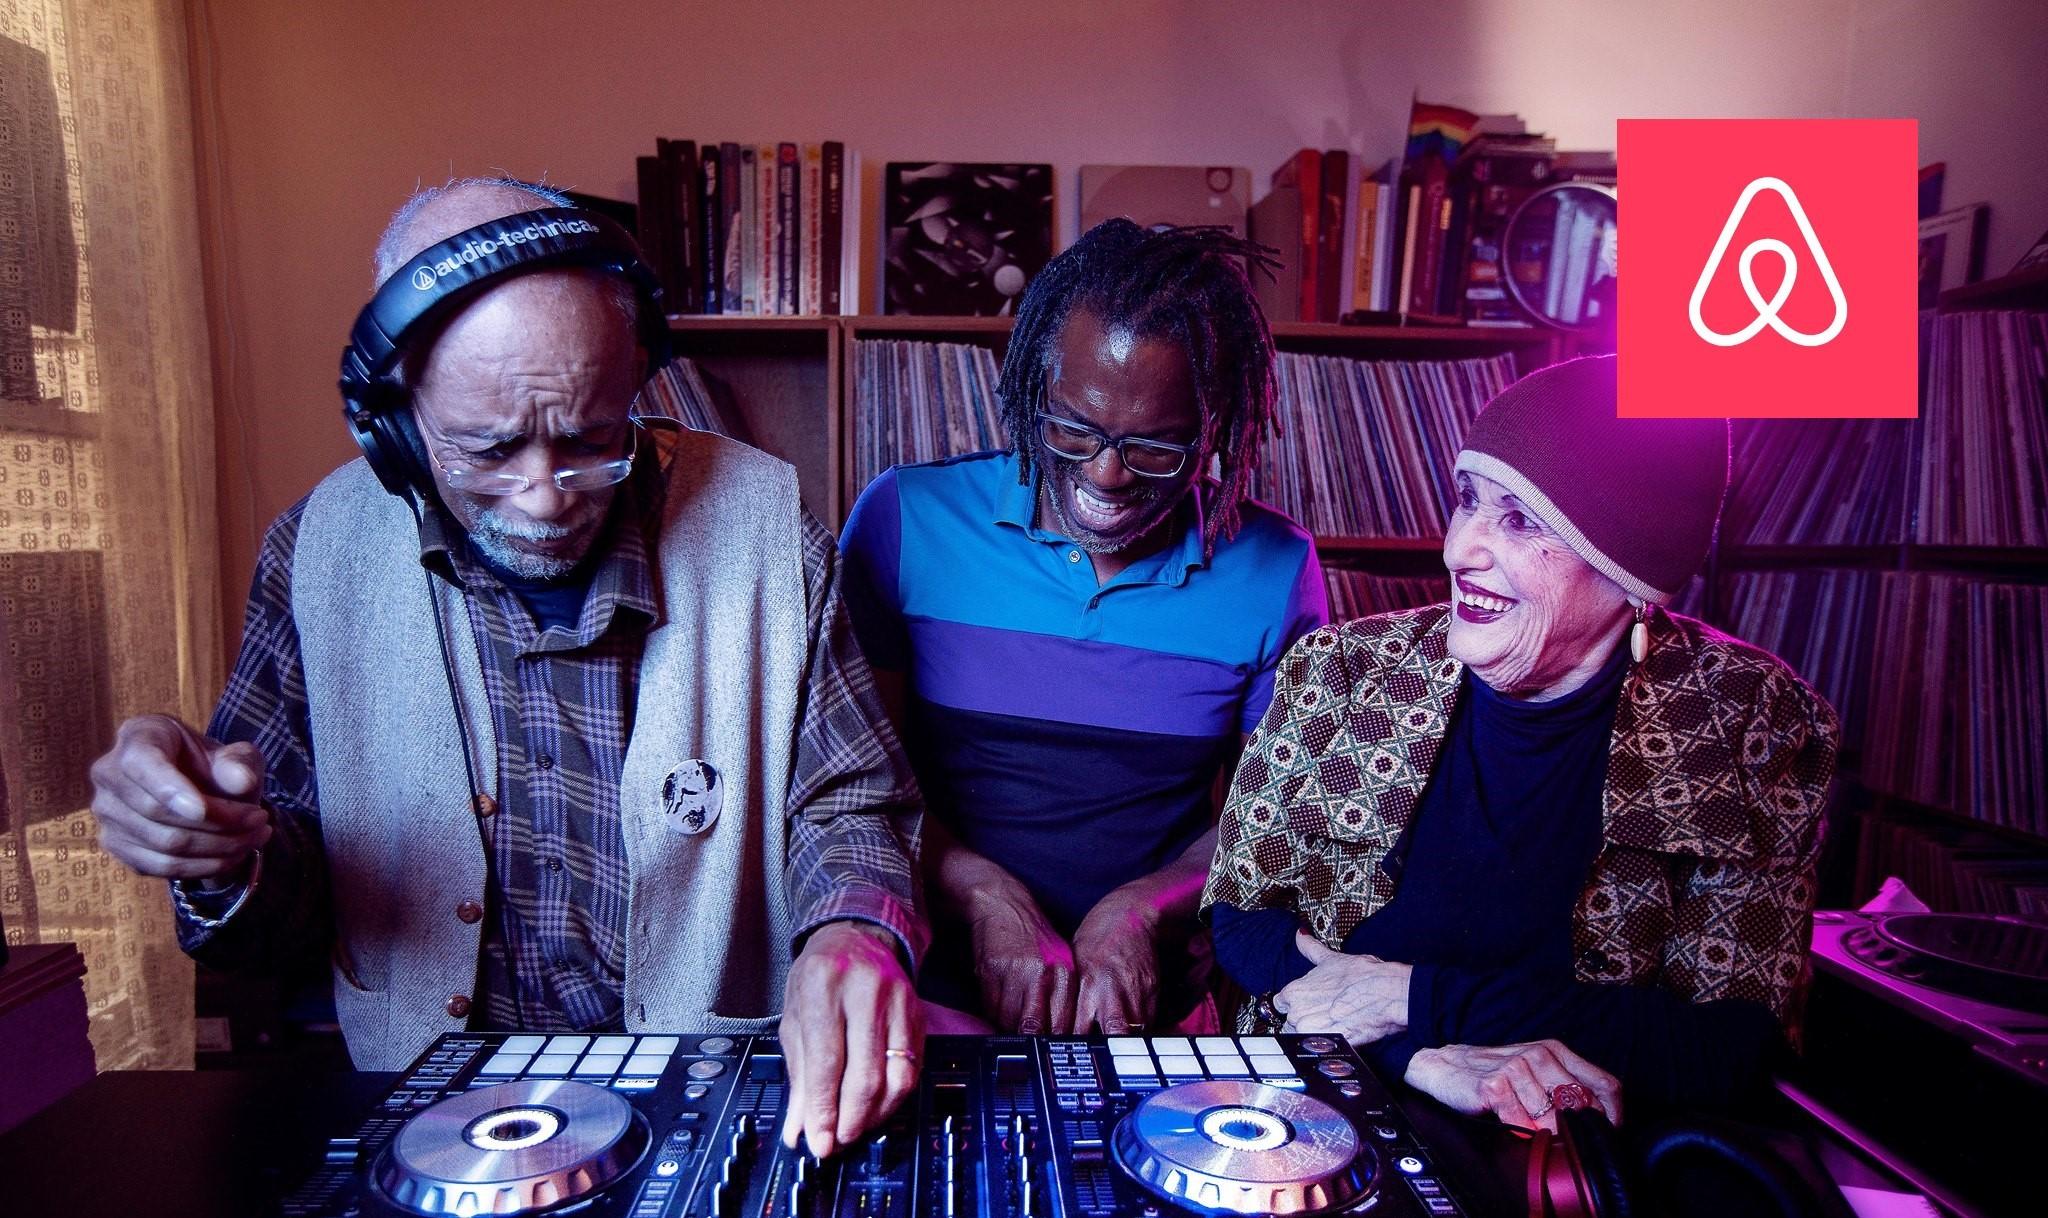 Airbnb logo over image of elderly people dj'ing at a party